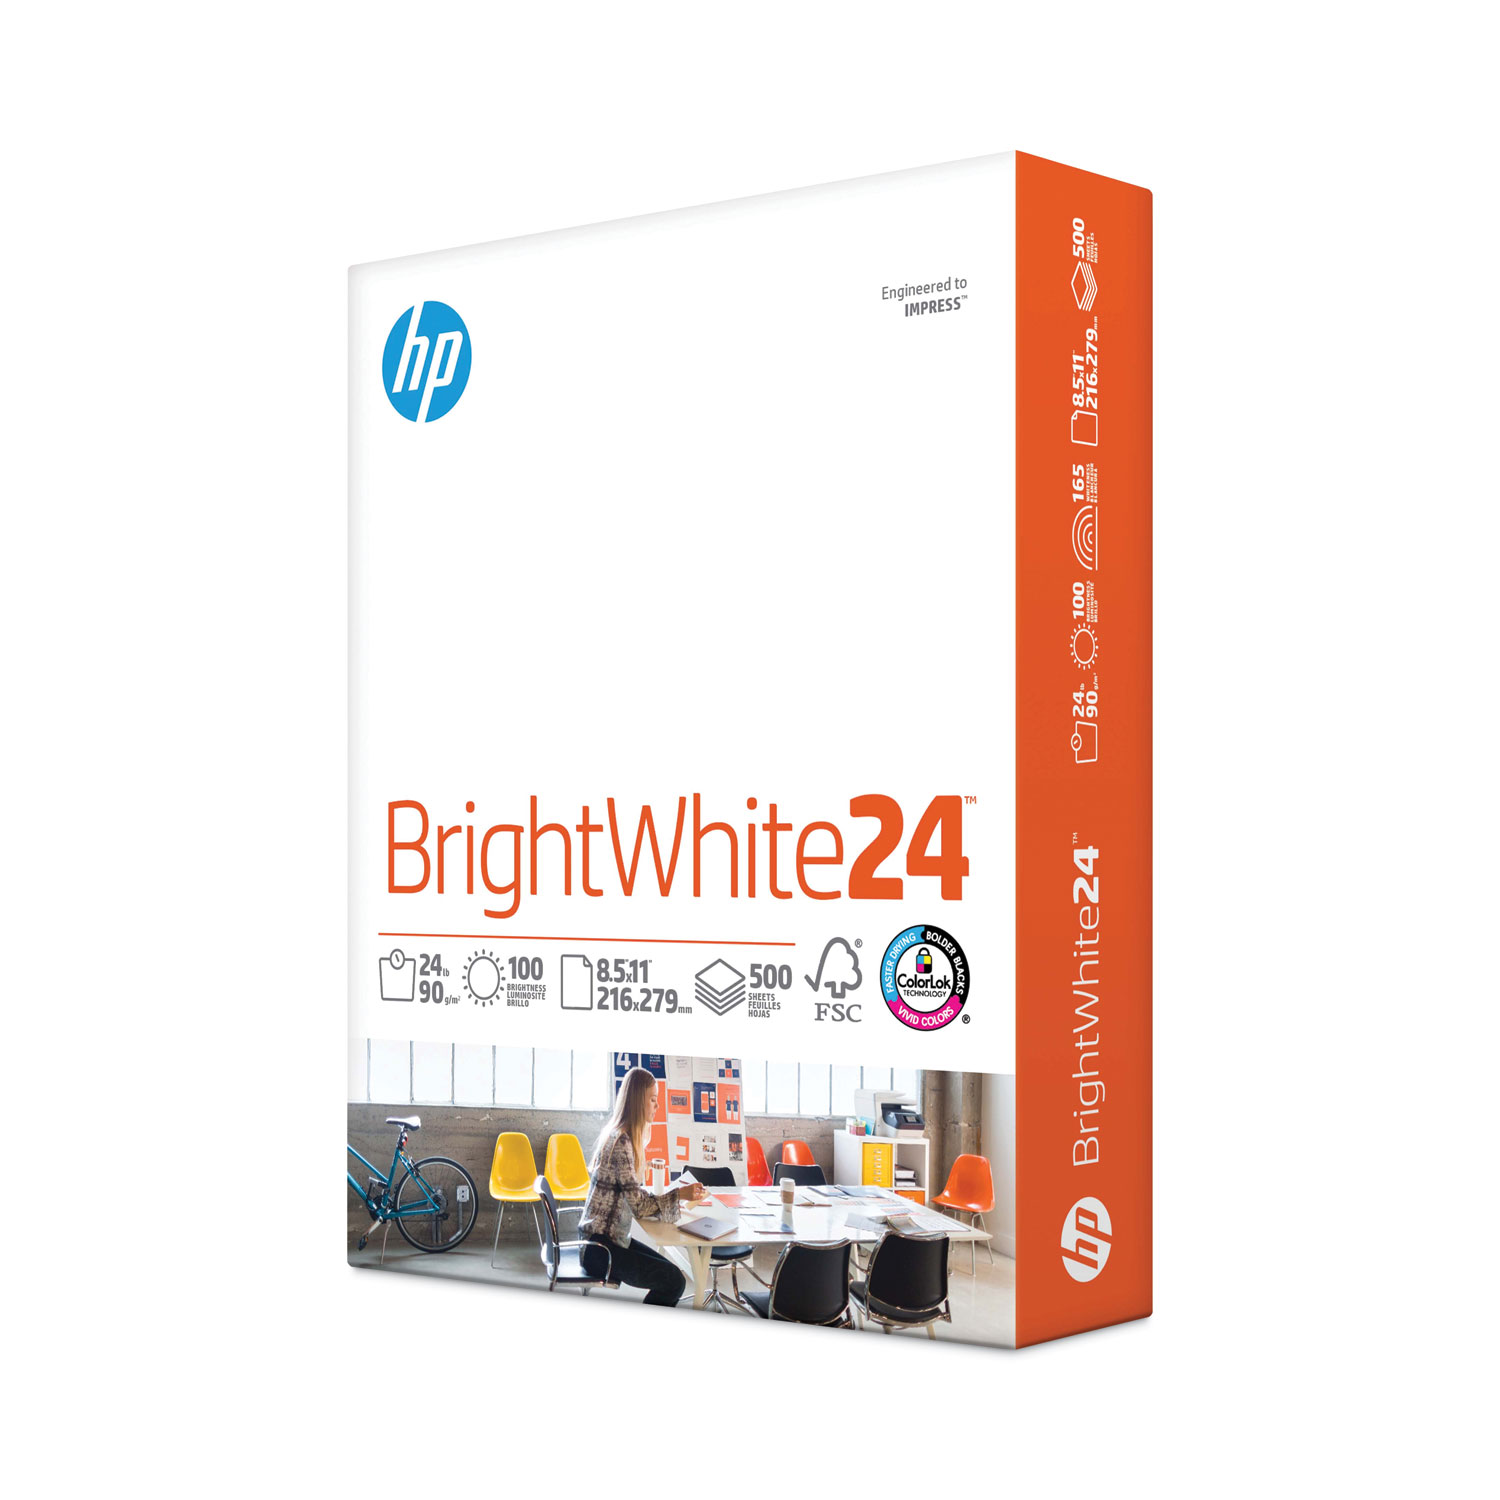 HP Printer Paper | 8.5x11 Paper |Office 20 lb | 1 Ream - 500 Sheets | 92 Bright | Made in USA - FSC Certified | 112150R